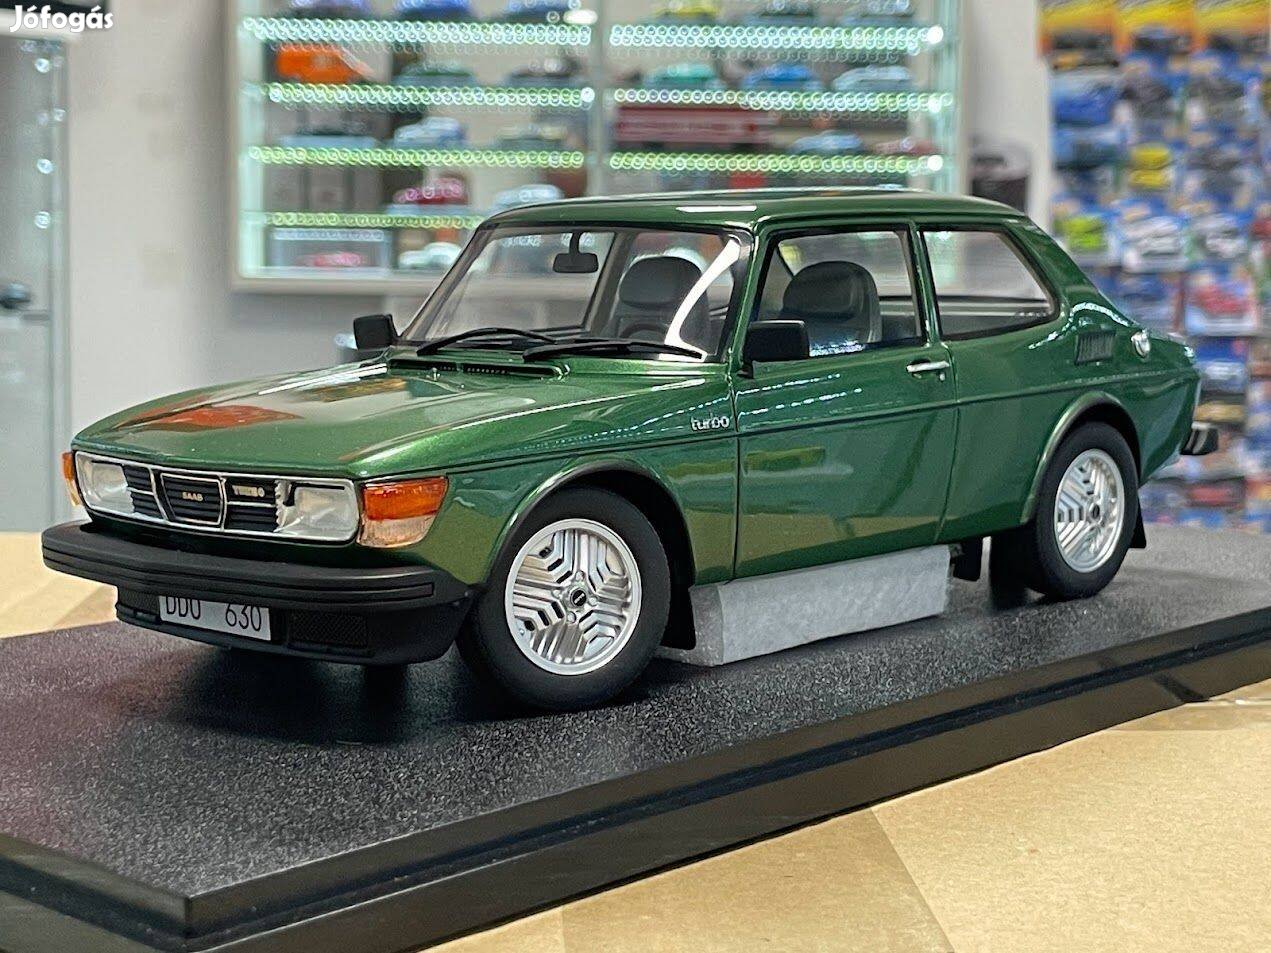 Saab 99 Turbo 1978 1:18 1/18 Cult Scale Models CML095-1 resin